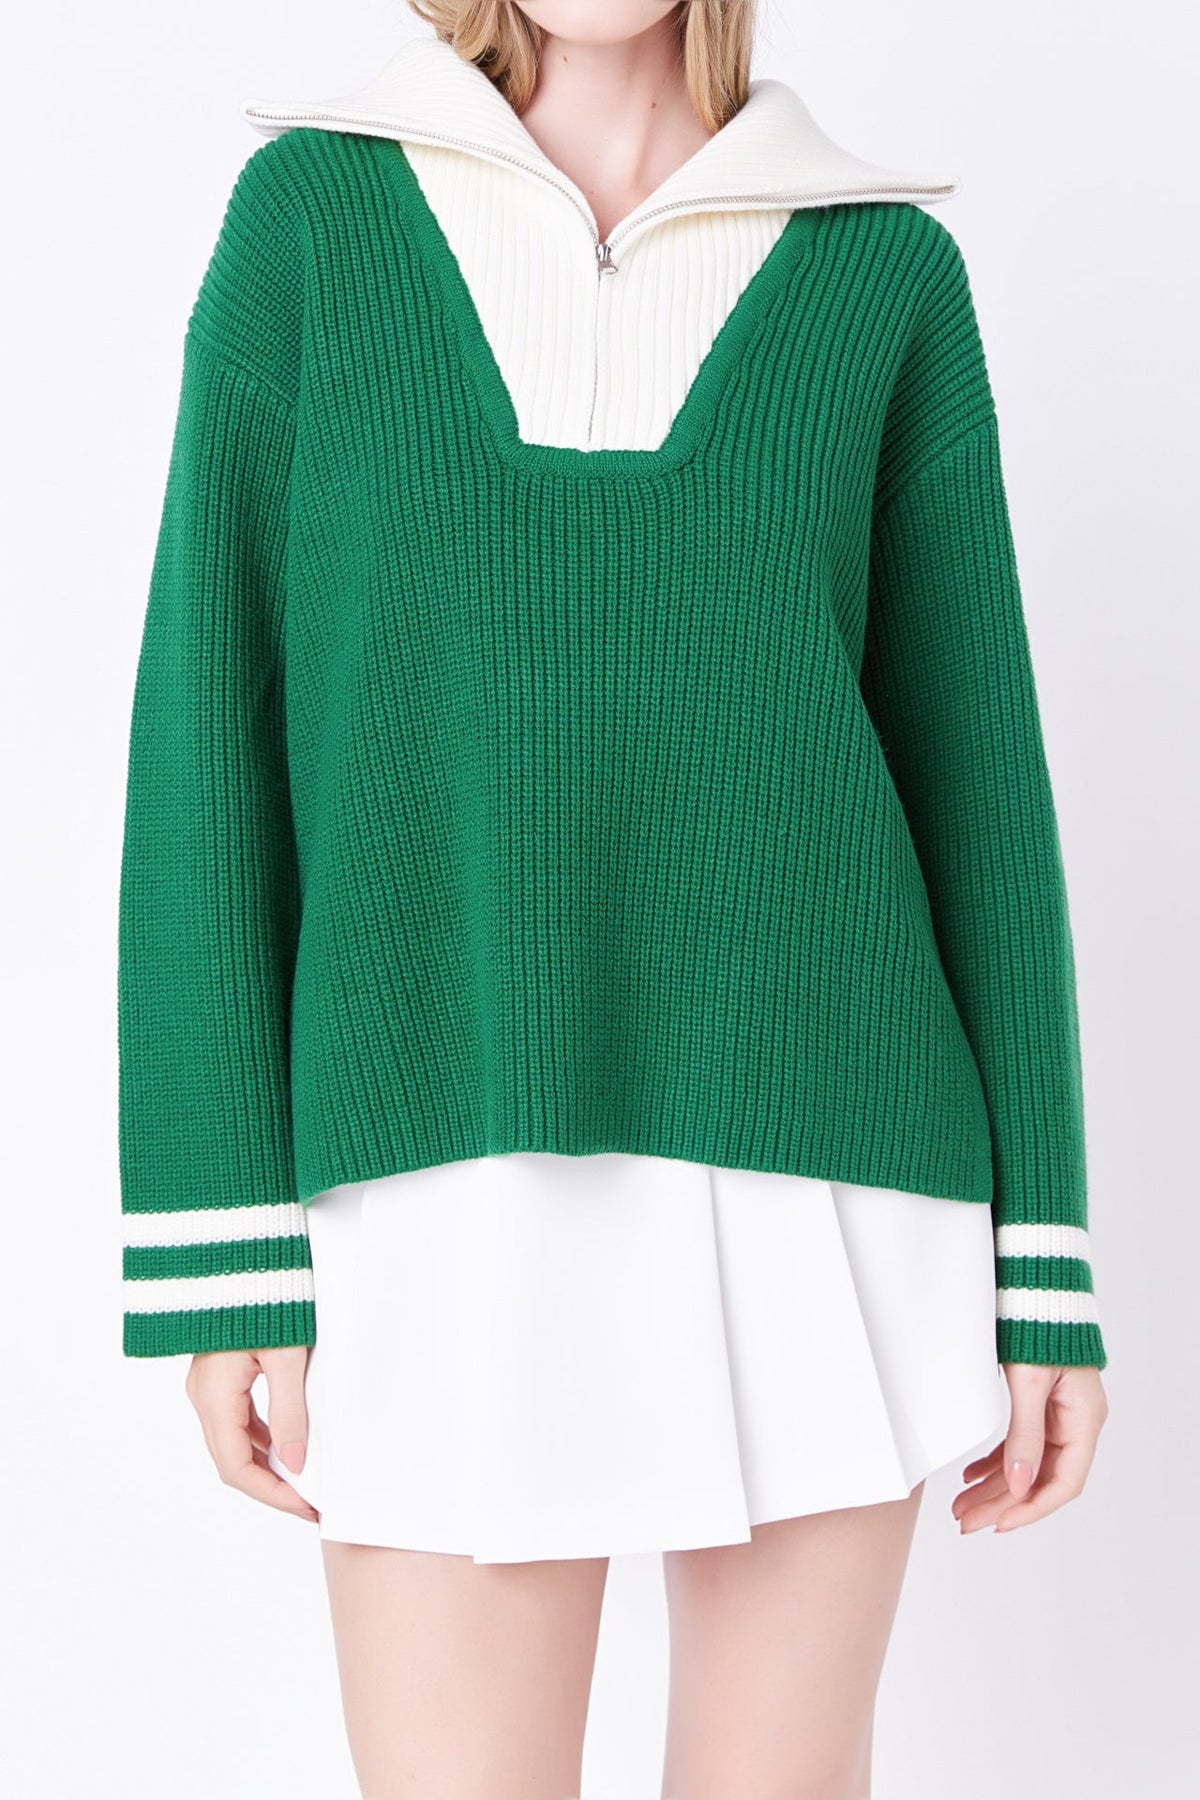 ENGLISH FACTORY - Stripe Knitted Half Zip up Sweater - SWEATERS & KNITS available at Objectrare